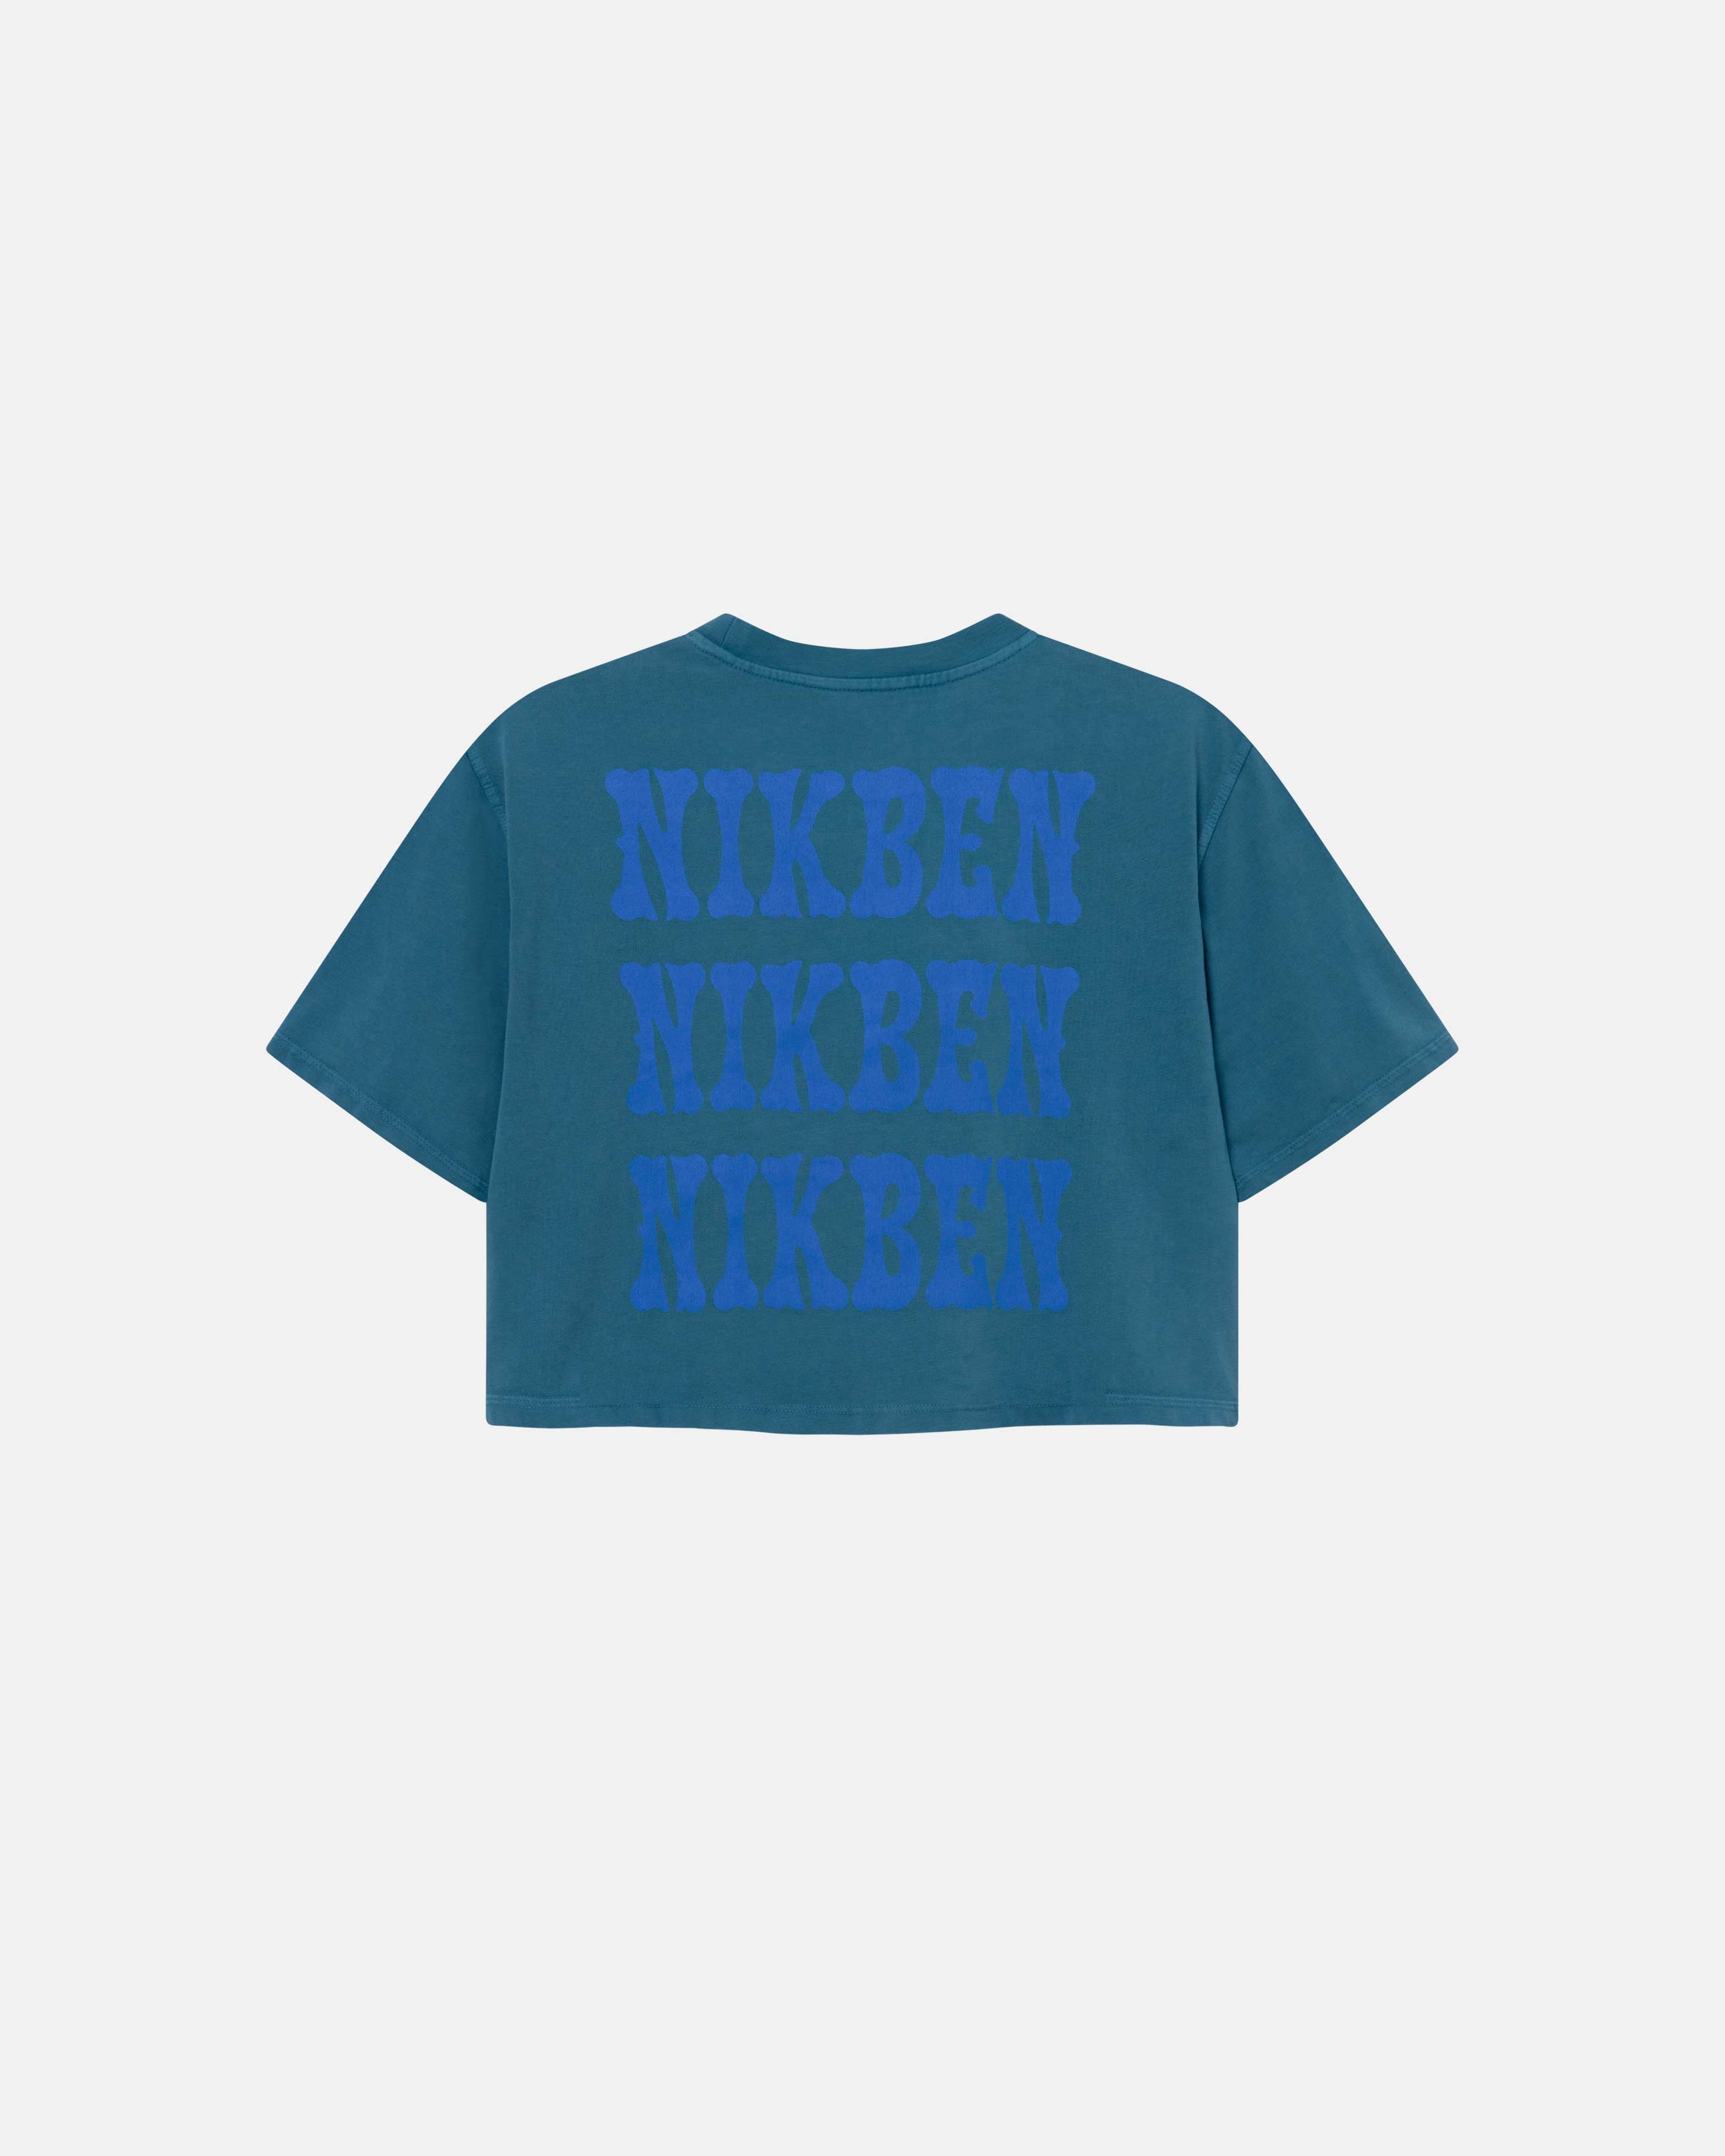 A navy blue t-shirt with three blue large Nikben logos on its back